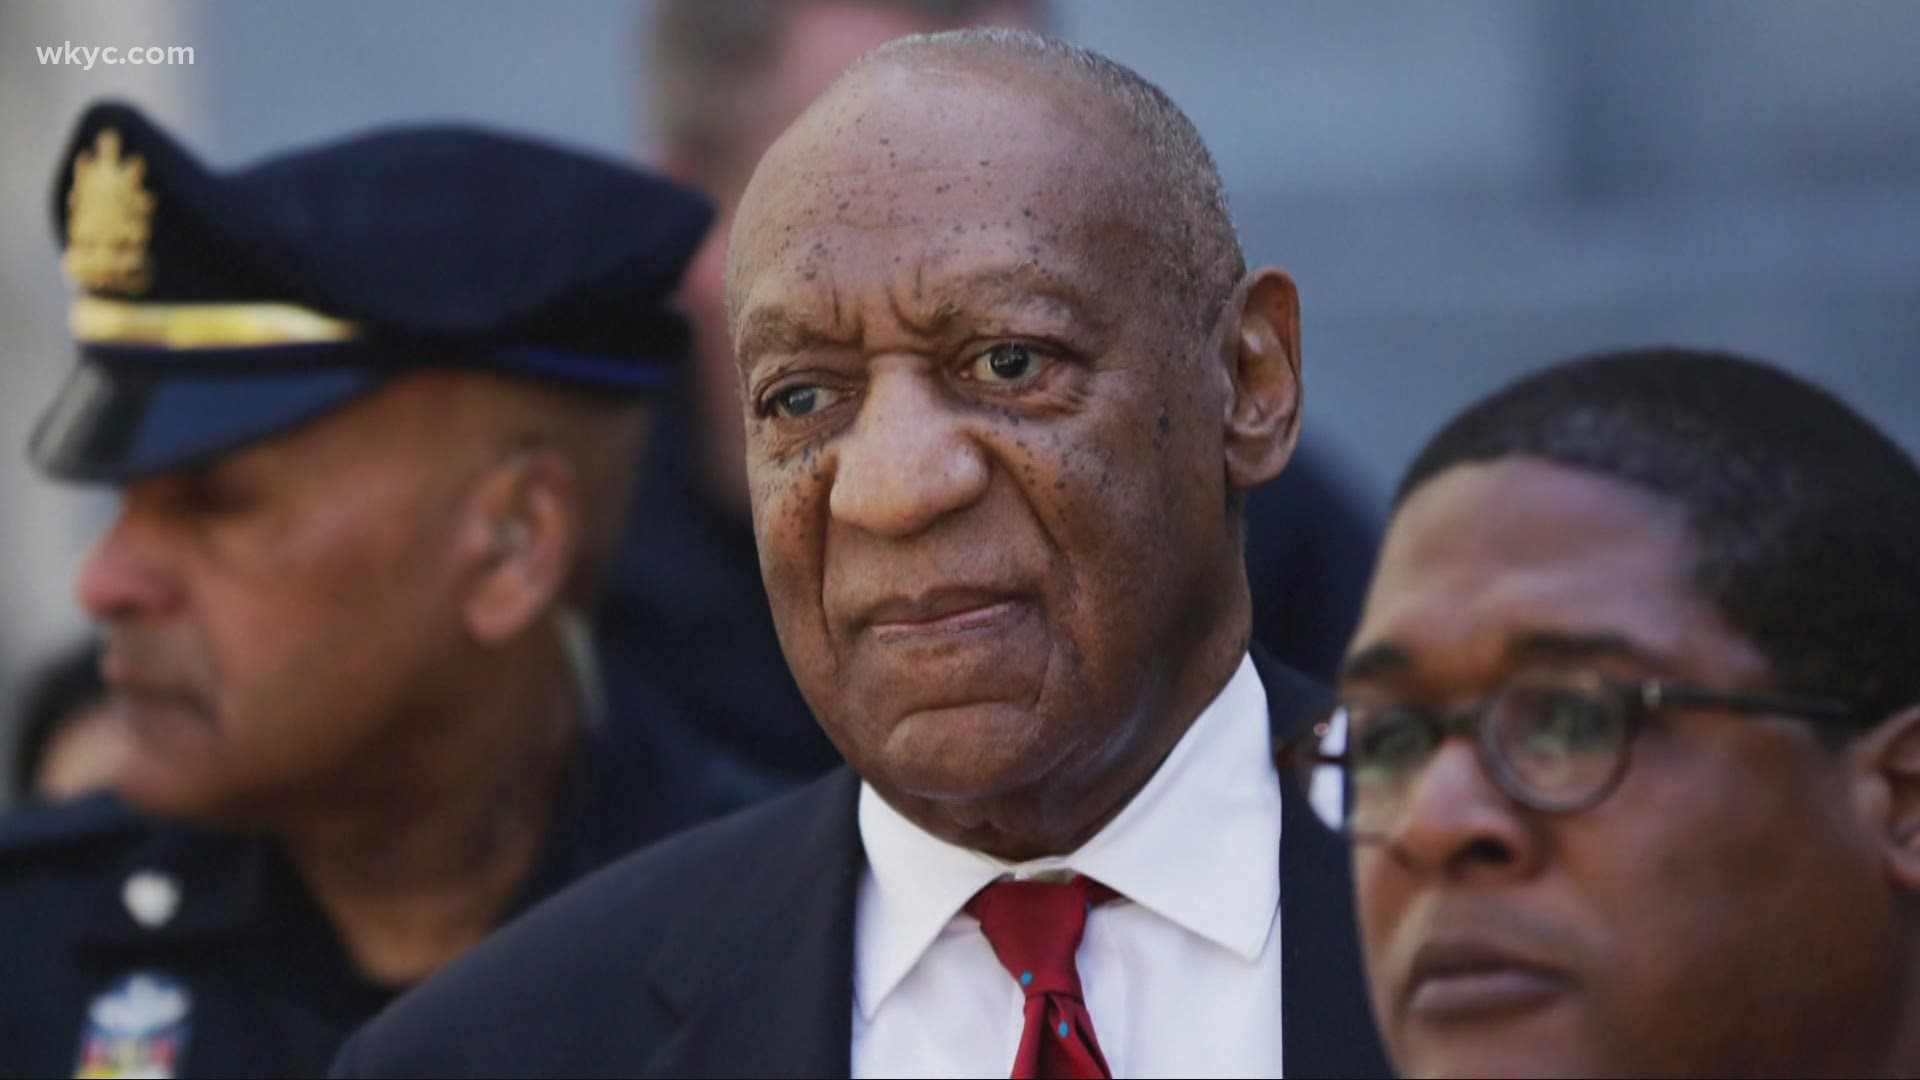 Cosby's sexual assault conviction was overturned by the Pennsylvania Supreme Court, making him a free man.